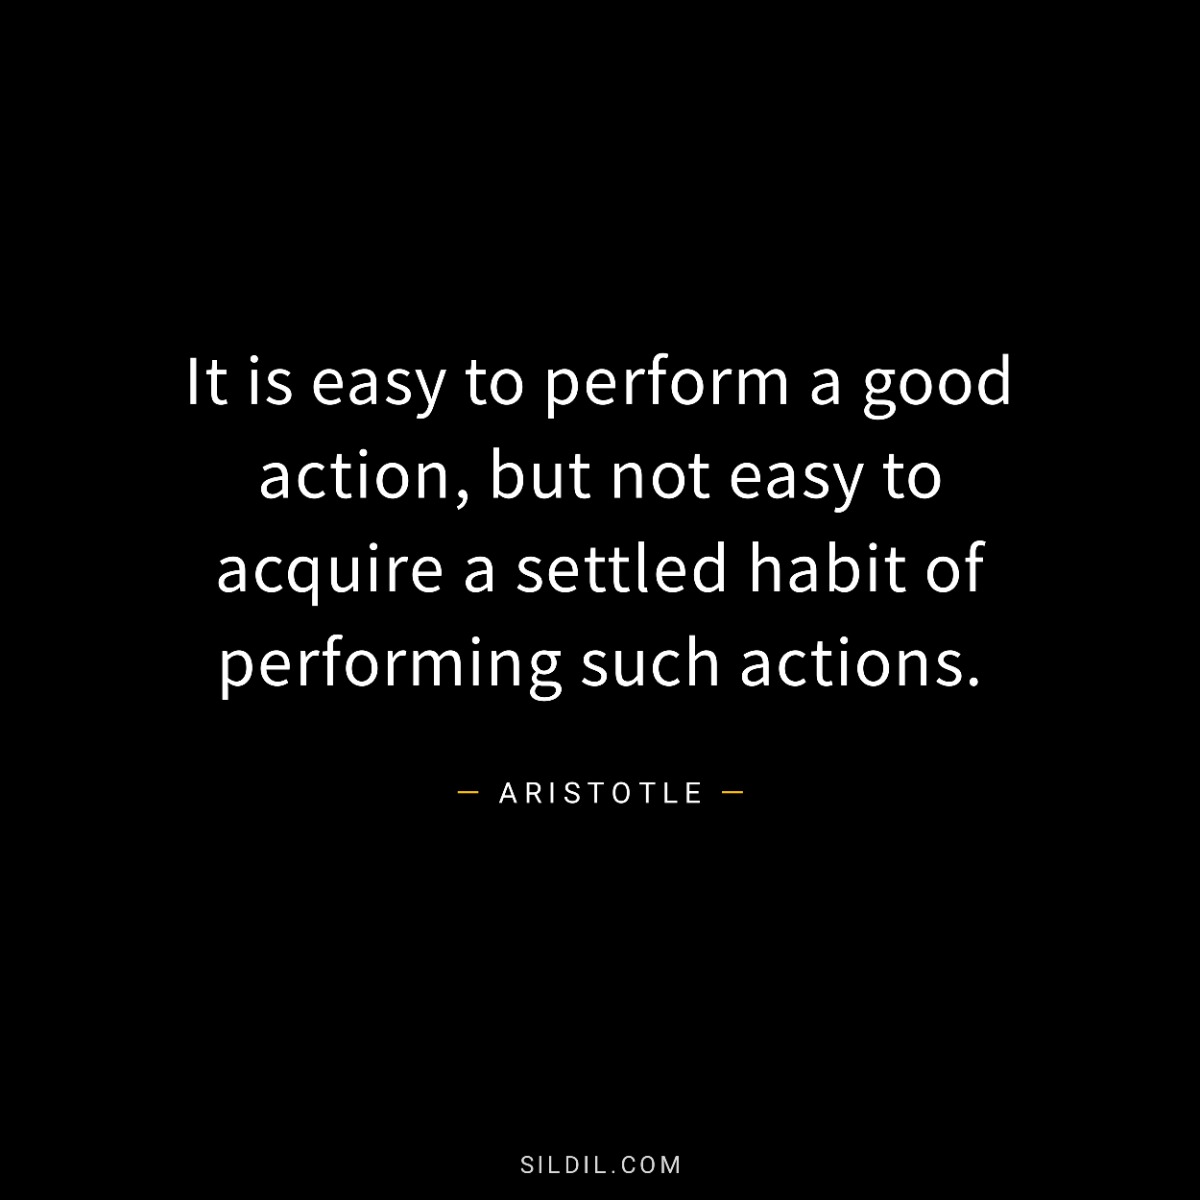 It is easy to perform a good action, but not easy to acquire a settled habit of performing such actions.